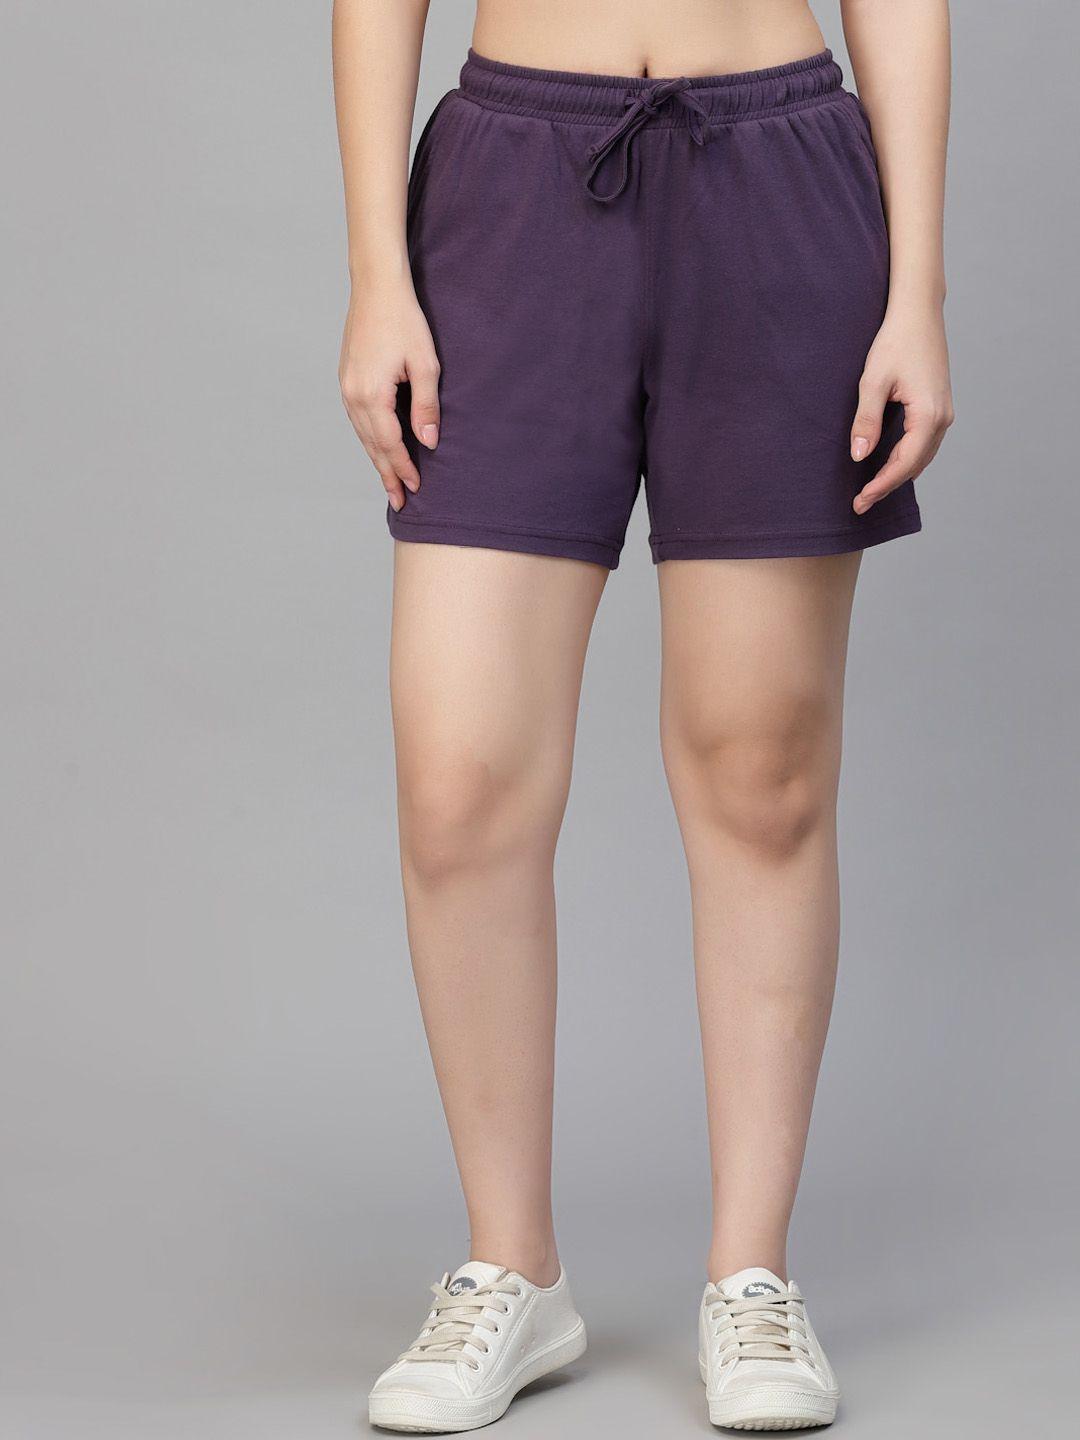 Strong And Brave Women Mid-Rise Odour Free Cotton Shorts